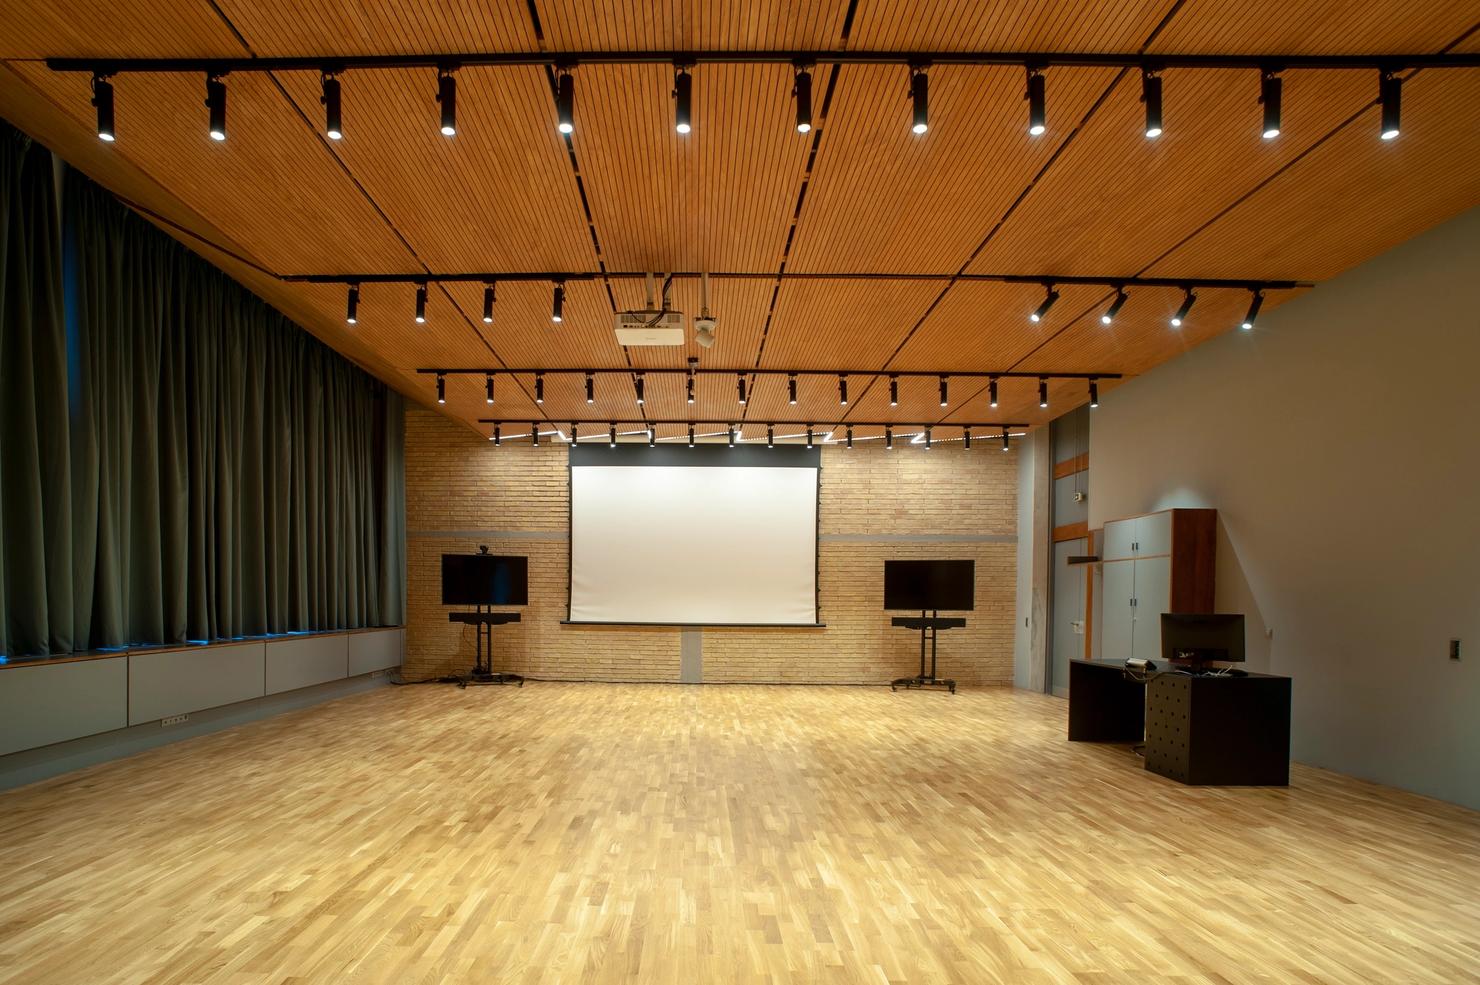 The distance learning studio is a room within the Athens Conservatoire building with wooden flooring and ceiling. On a brick wall there are two monitors between a blank projection screen. To the left, there is a desk with a computer next to a standing cabinet.